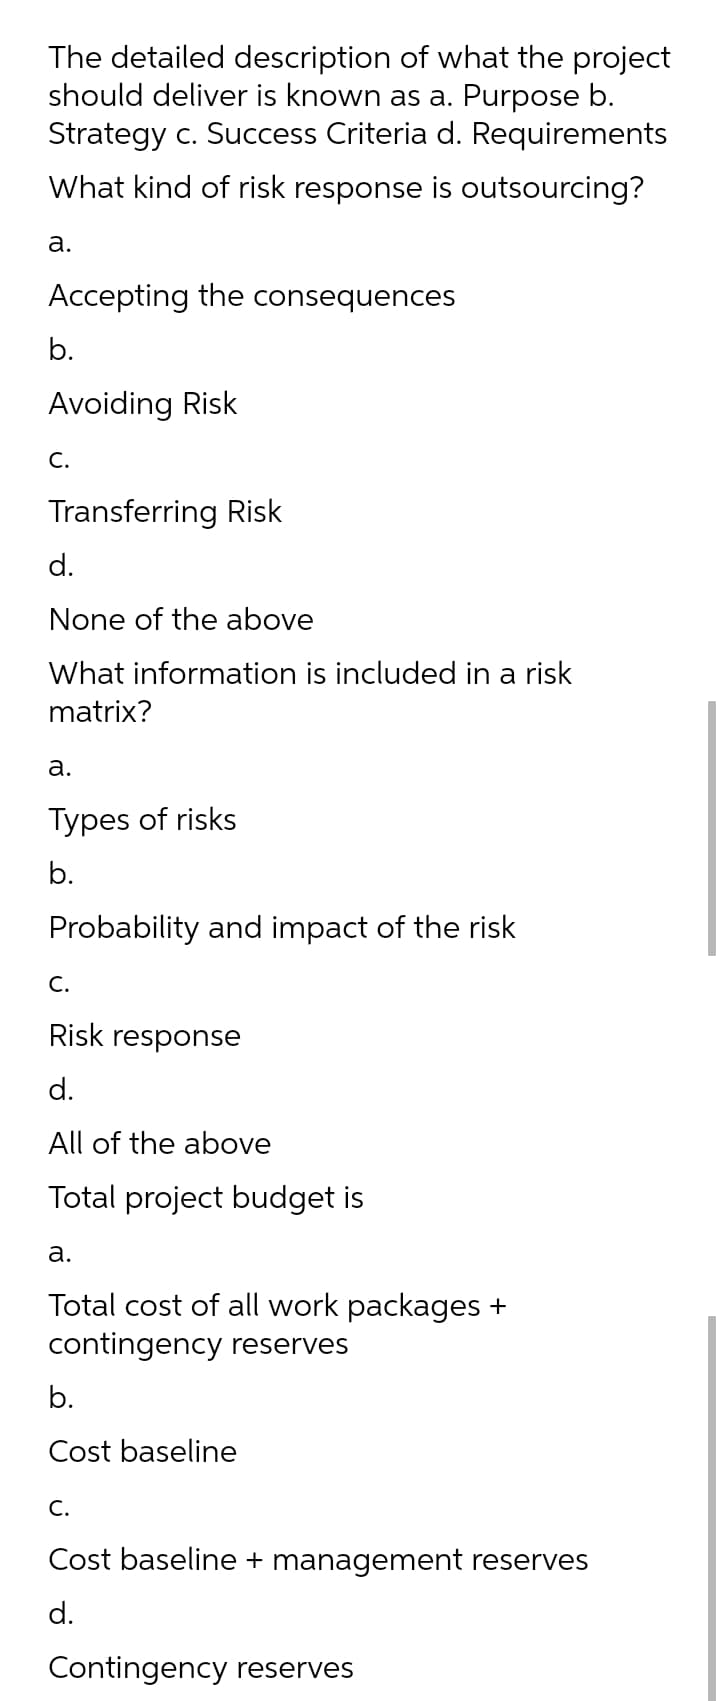 The detailed description of what the project
should deliver is known as a. Purpose b.
Strategy c. Success Criteria d. Requirements
What kind of risk response is outsourcing?
а.
Accepting the consequences
b.
Avoiding Risk
С.
Transferring Risk
d.
None of the above
What information is included in a risk
matrix?
а.
Types of risks
b.
Probability and impact of the risk
C.
Risk response
d.
All of the above
Total project budget is
а.
Total cost of all work packages +
contingency reserves
b.
Cost baseline
C.
Cost baseline + management reserves
d.
Contingency reserves
